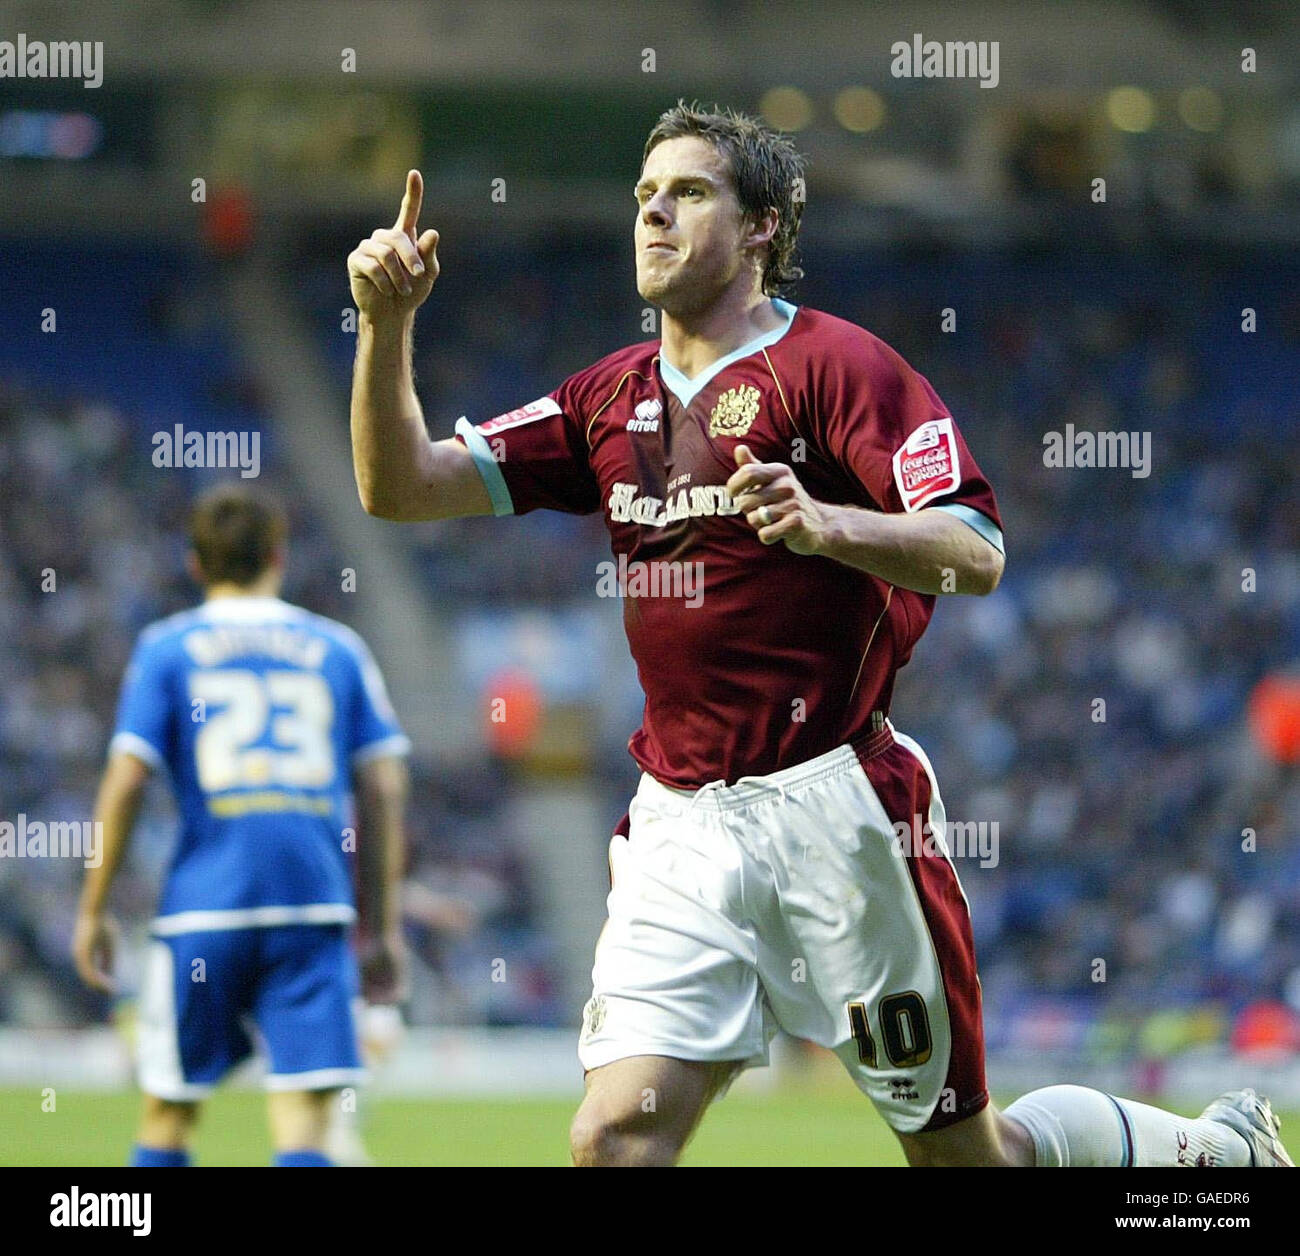 Soccer - Coca-Cola Football League Championship - Leicester City v Burnley - Walkers Stadium. Burnley's Andy Gray celebrates his goal during the Coca-Cola Football League Championship match at the Walkers Stadium, Leicester. Stock Photo